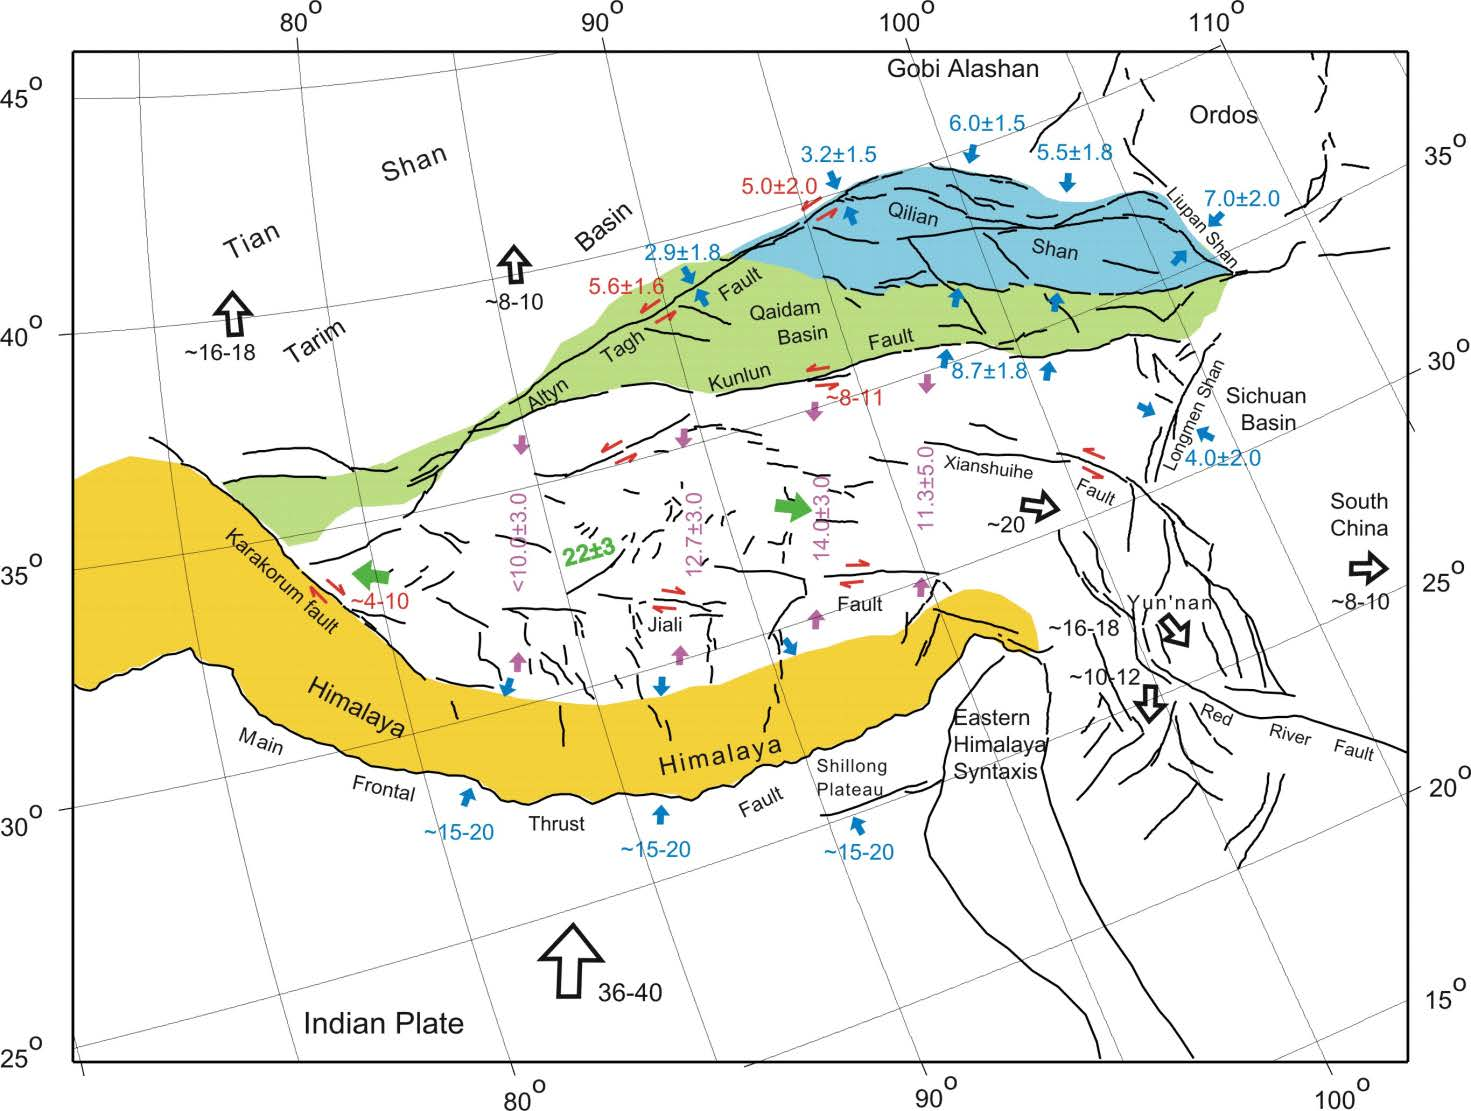 330 Simplified tectonic map showing active faults and movements of Tibetan Plateau and its margins constrained by global positioning system measurements. Numbers are rates of movement (mm/yr).